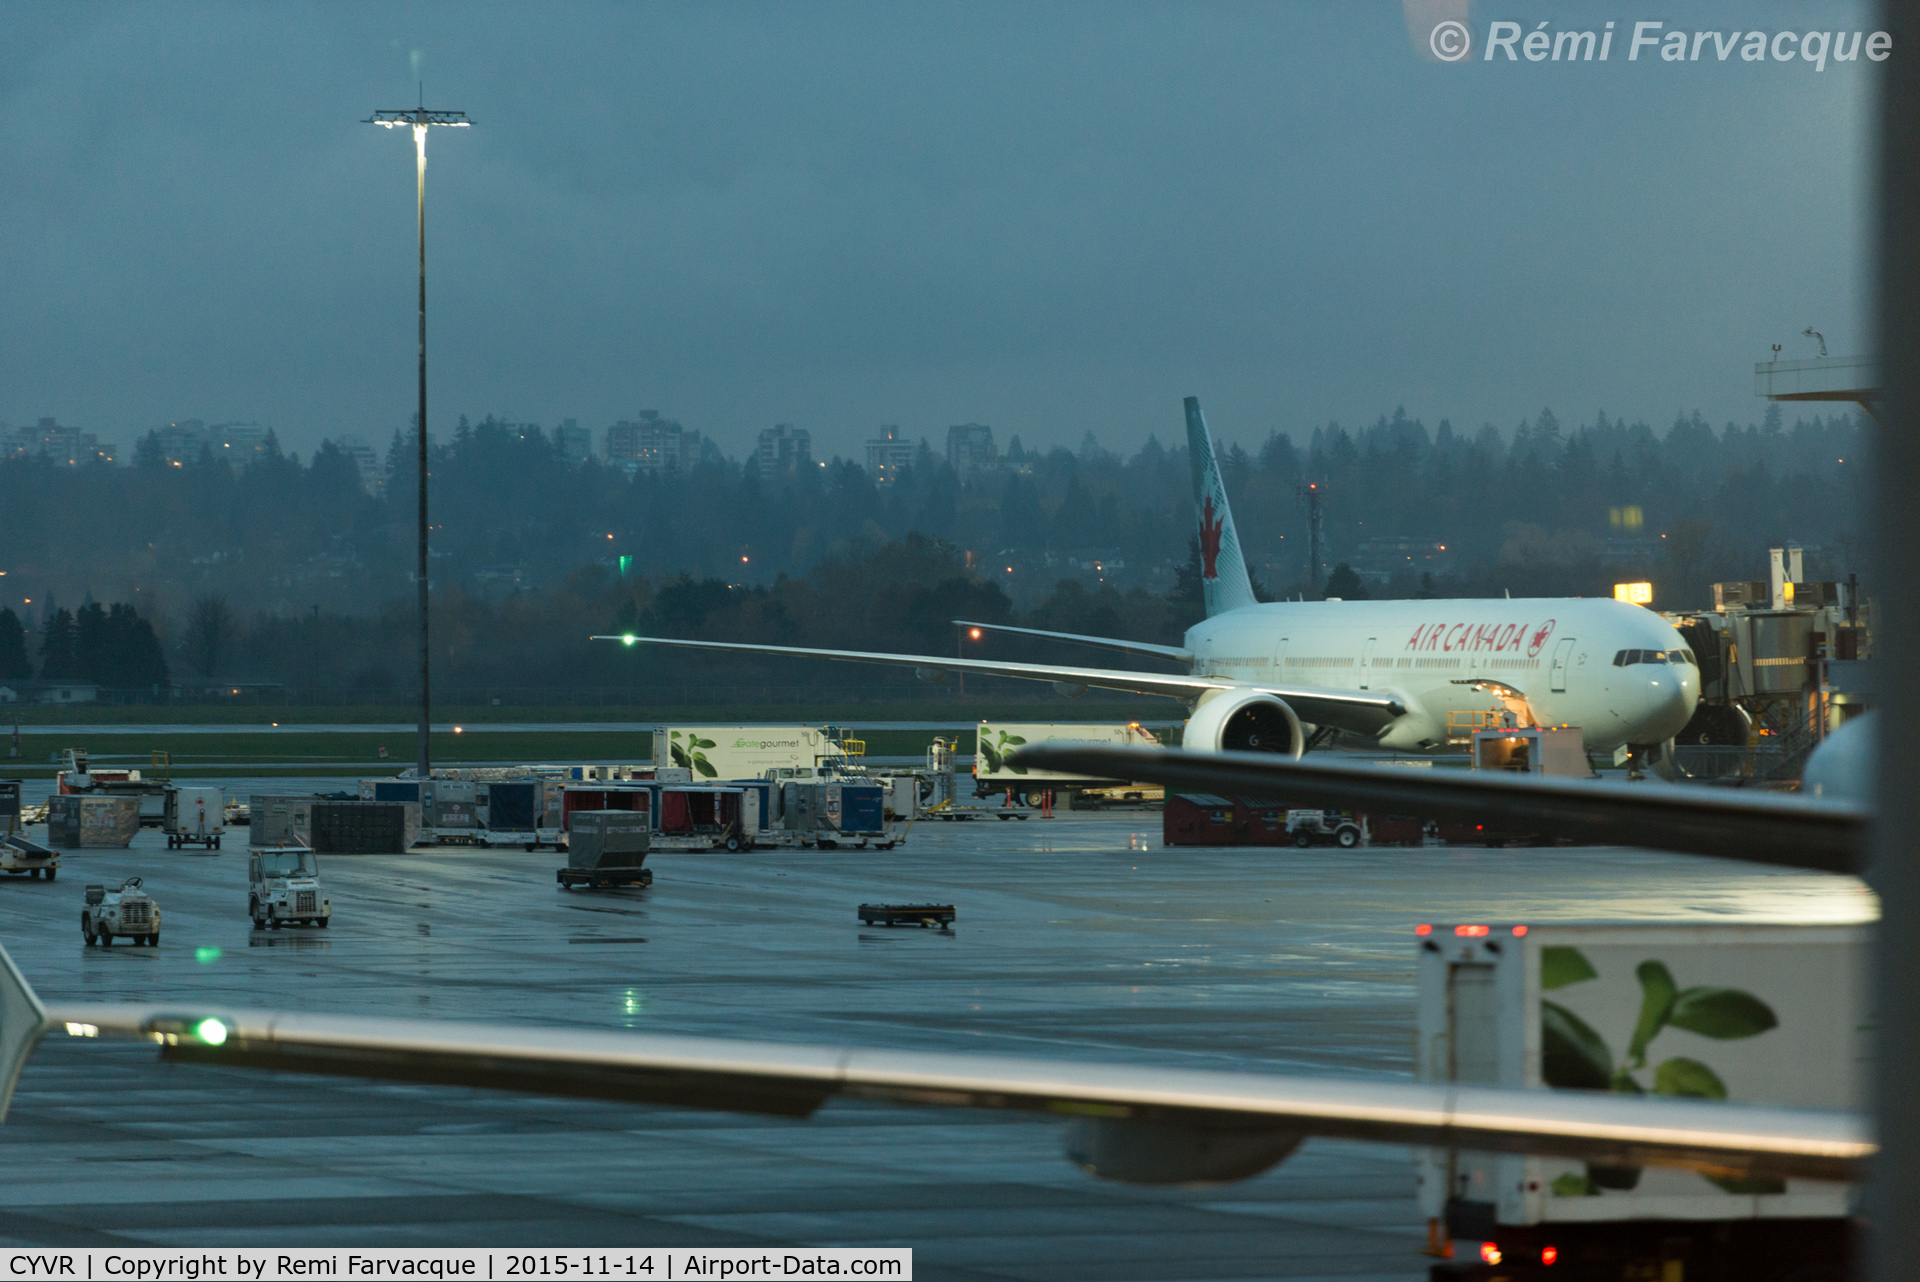 Vancouver International Airport, Vancouver, British Columbia Canada (CYVR) - A foggy evening. View north from Air Canada domestic terminal